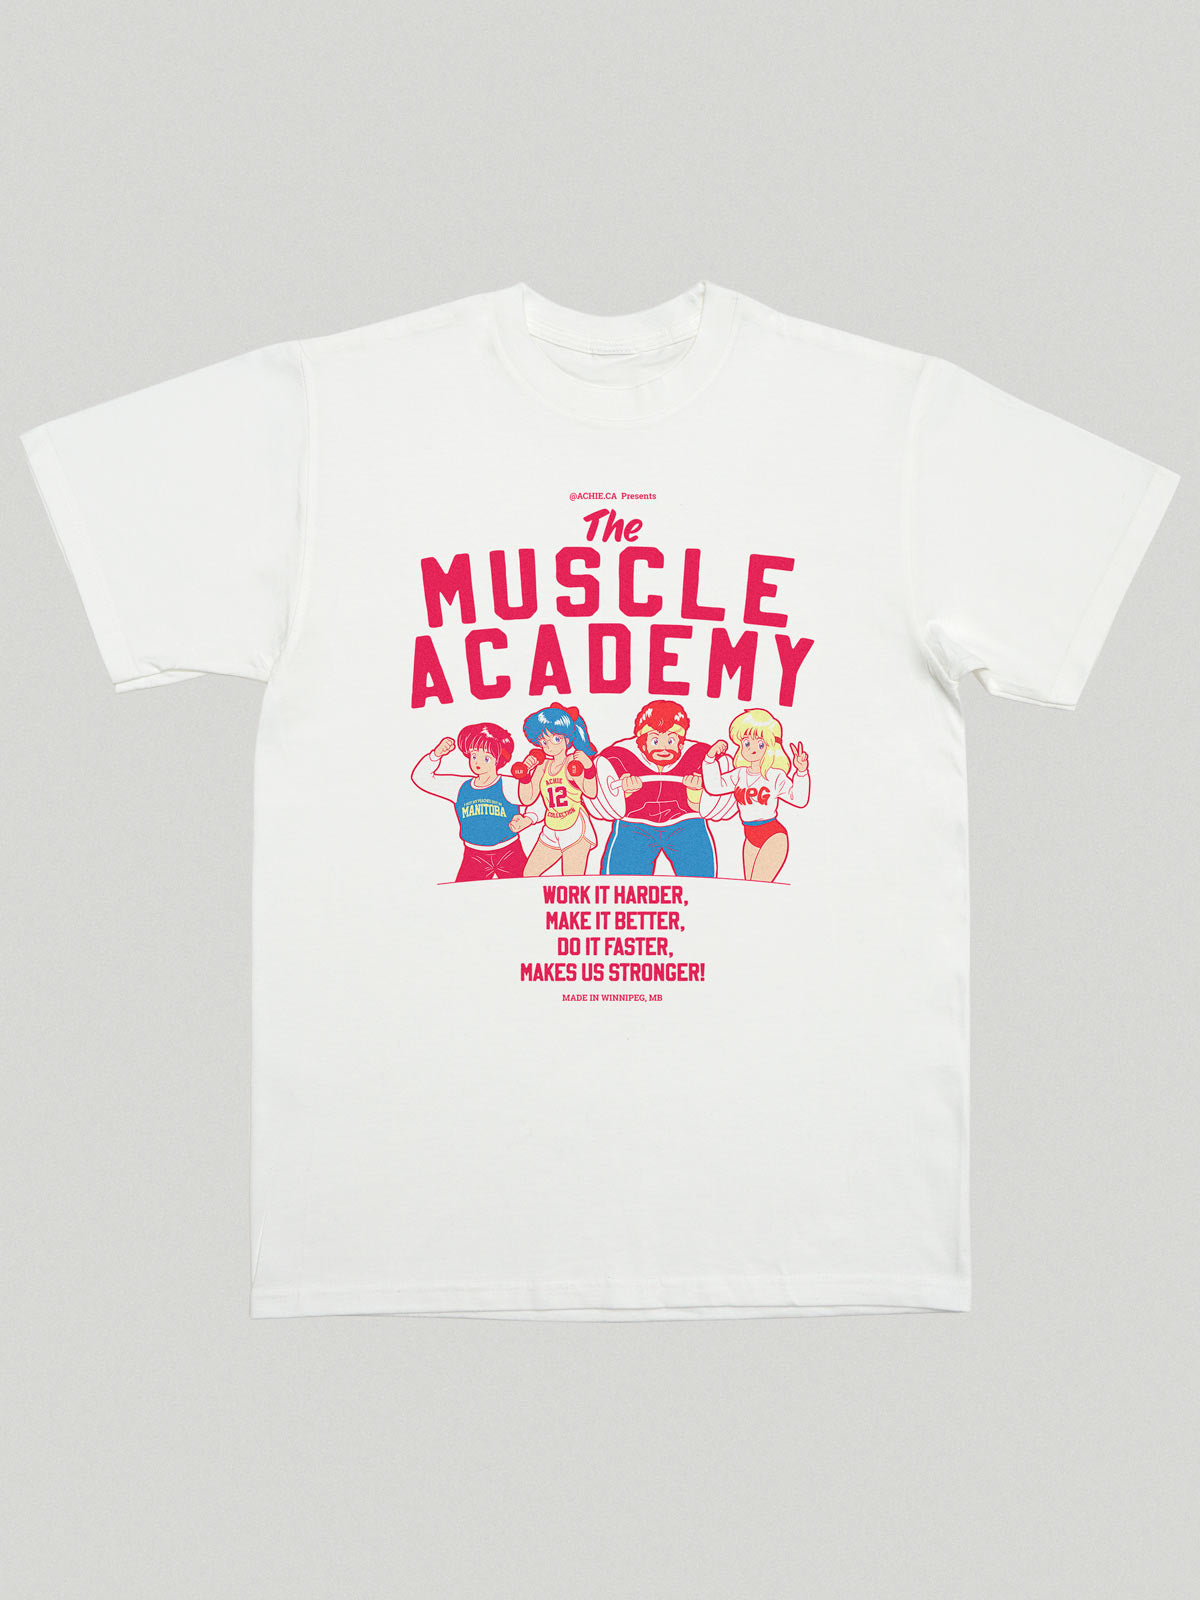 The Muscle Academy